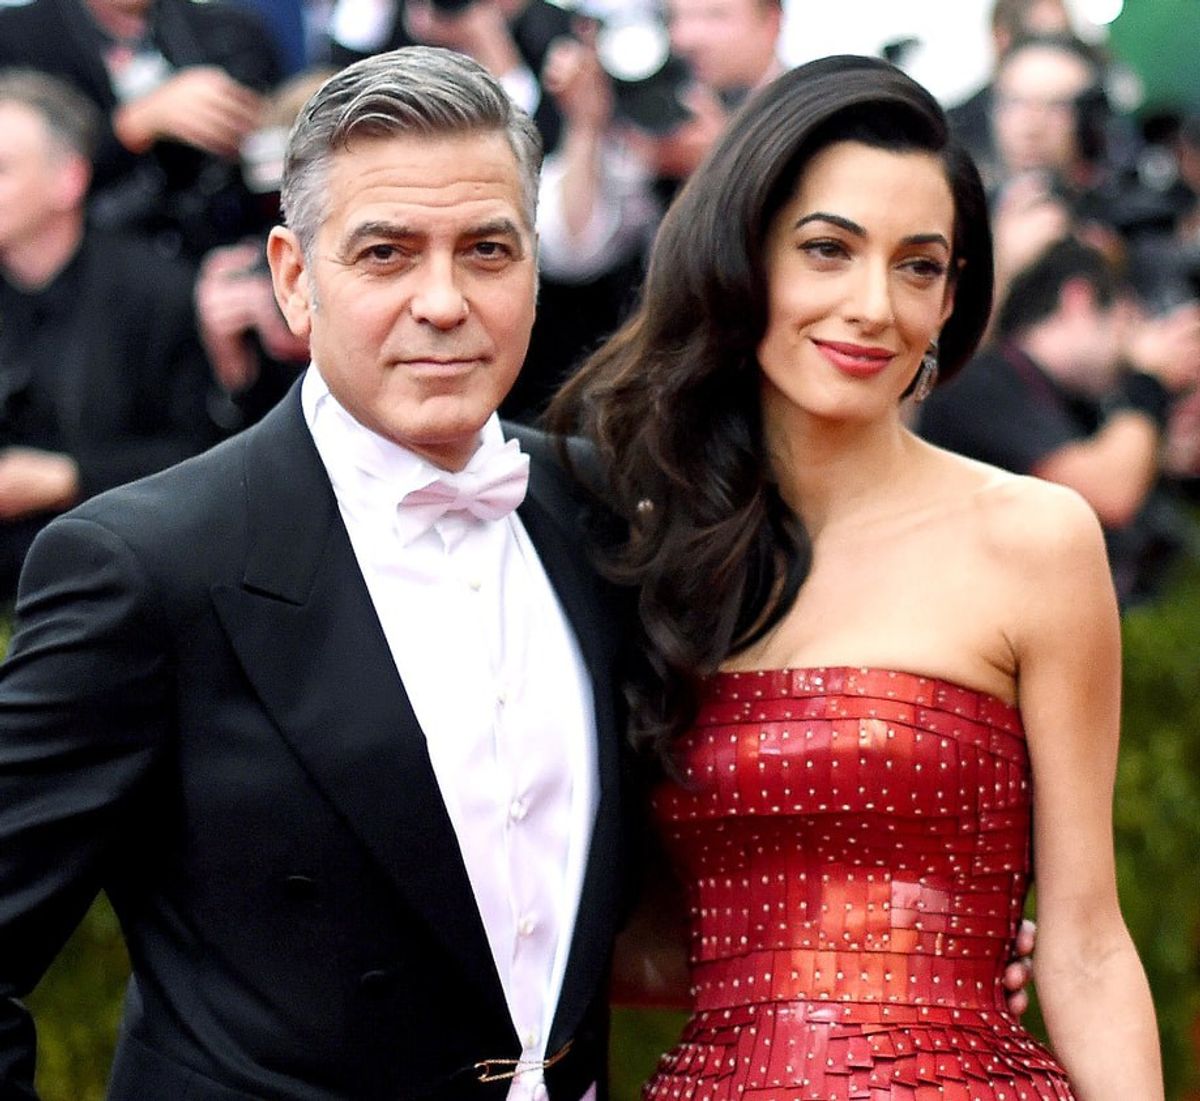 Why Young Women Need To Be More Like Amal Clooney